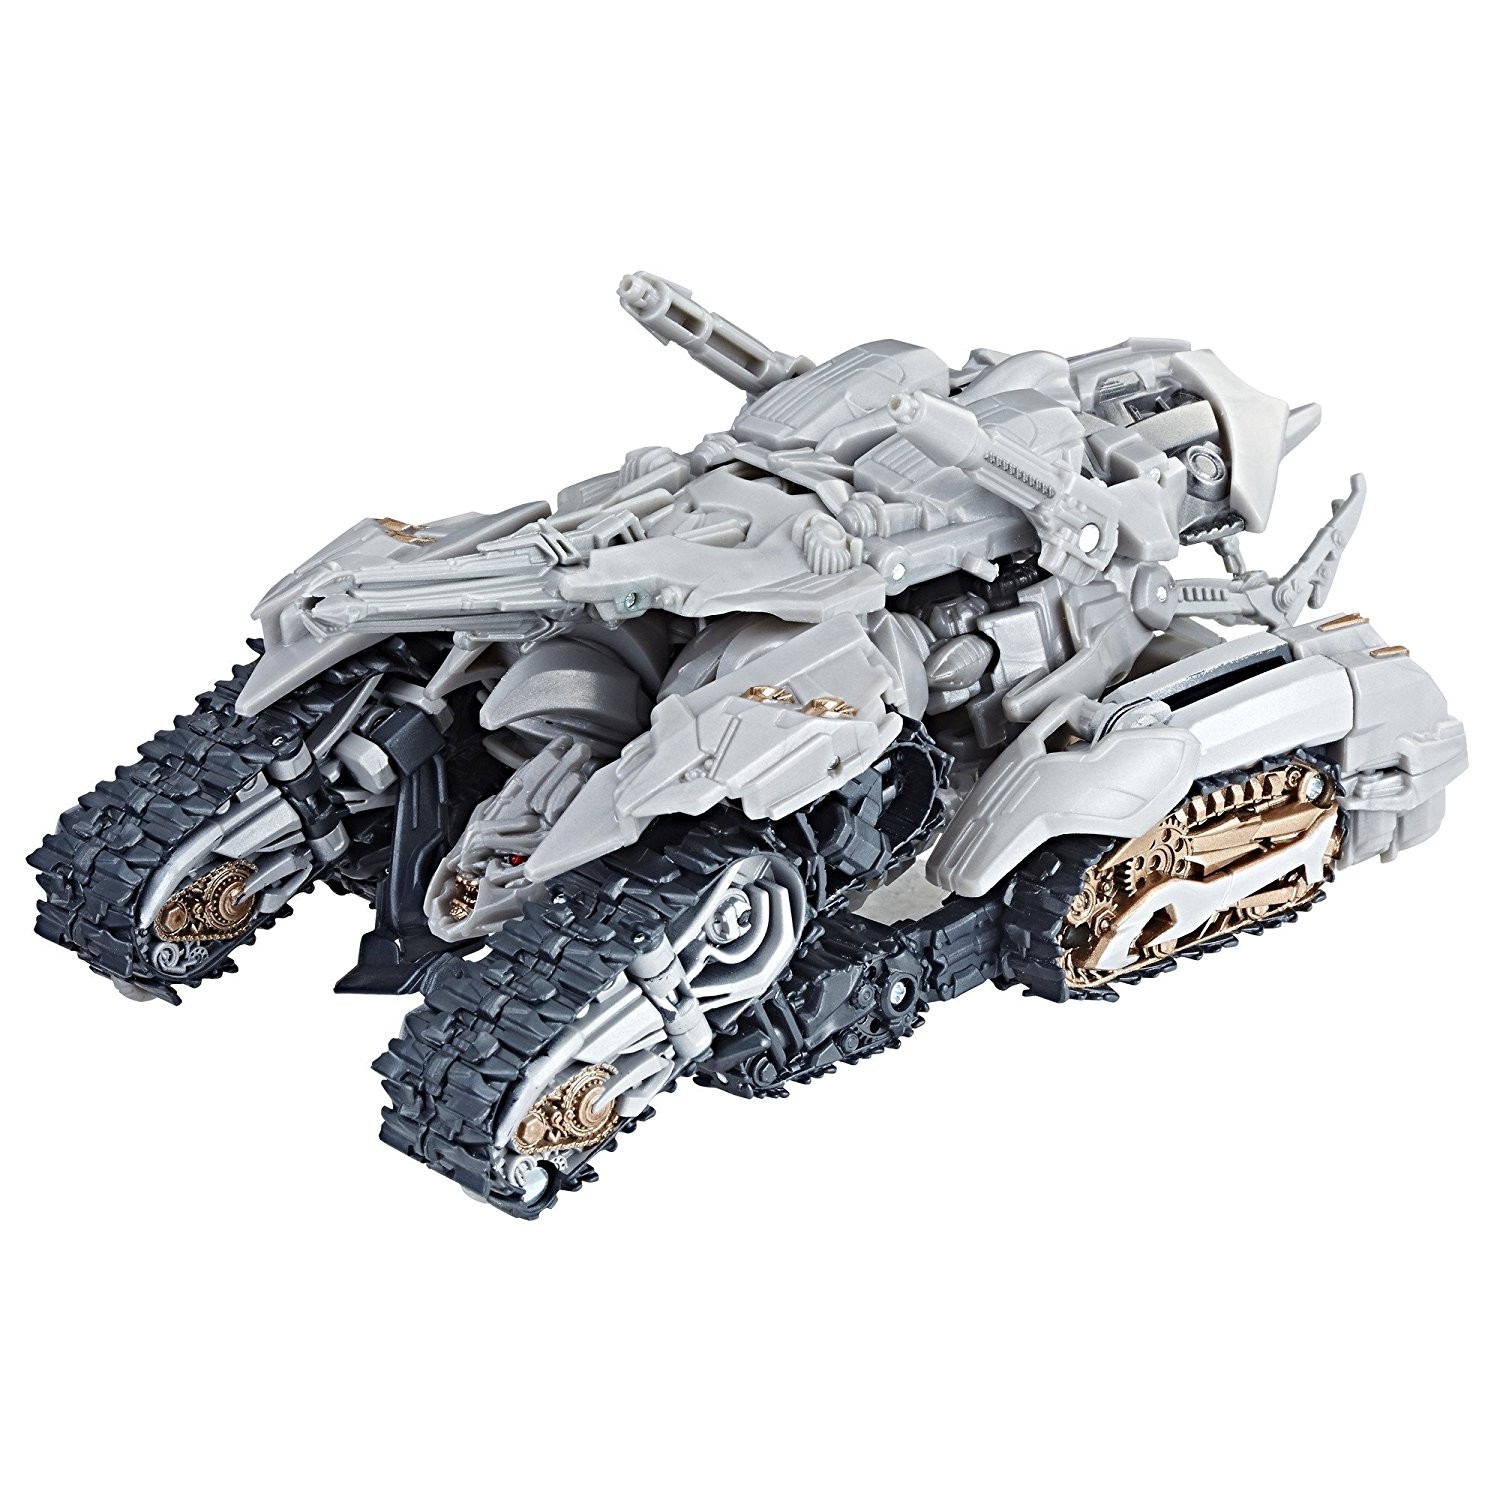 Transformers News: New Stock Images of Transformers Studio Series Megatron and Brawl